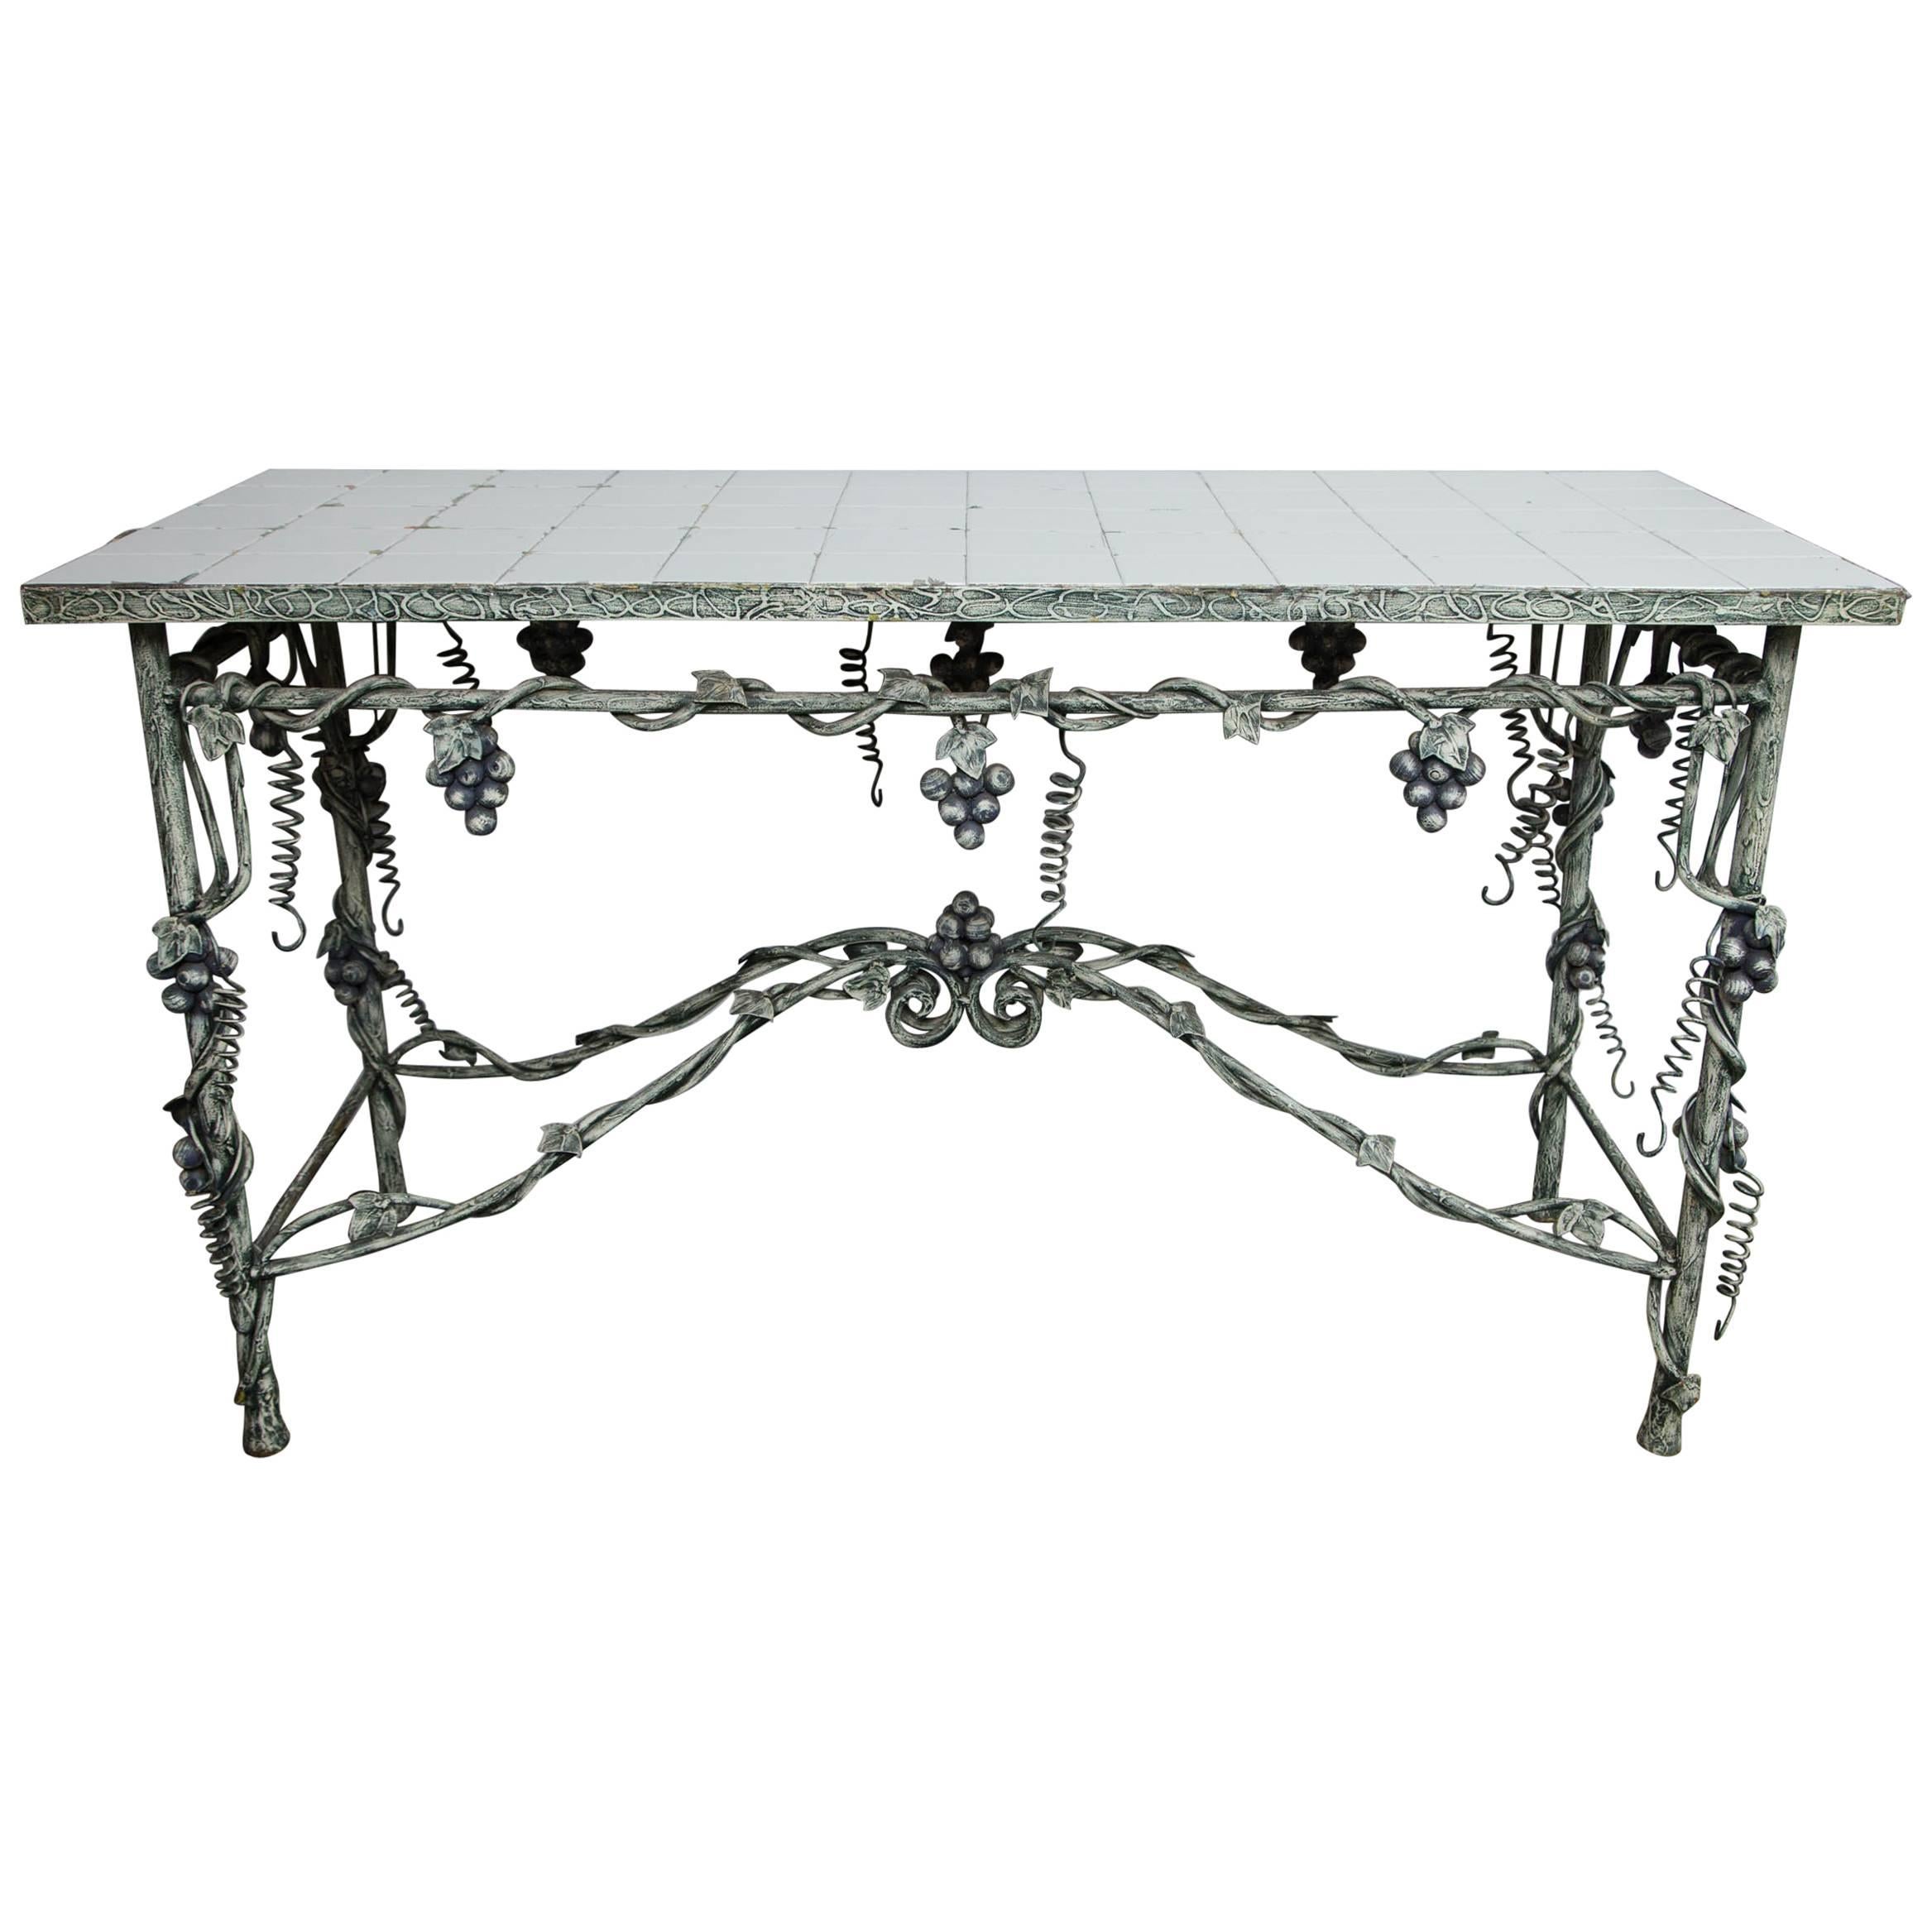 Painted Wrought Iron Table